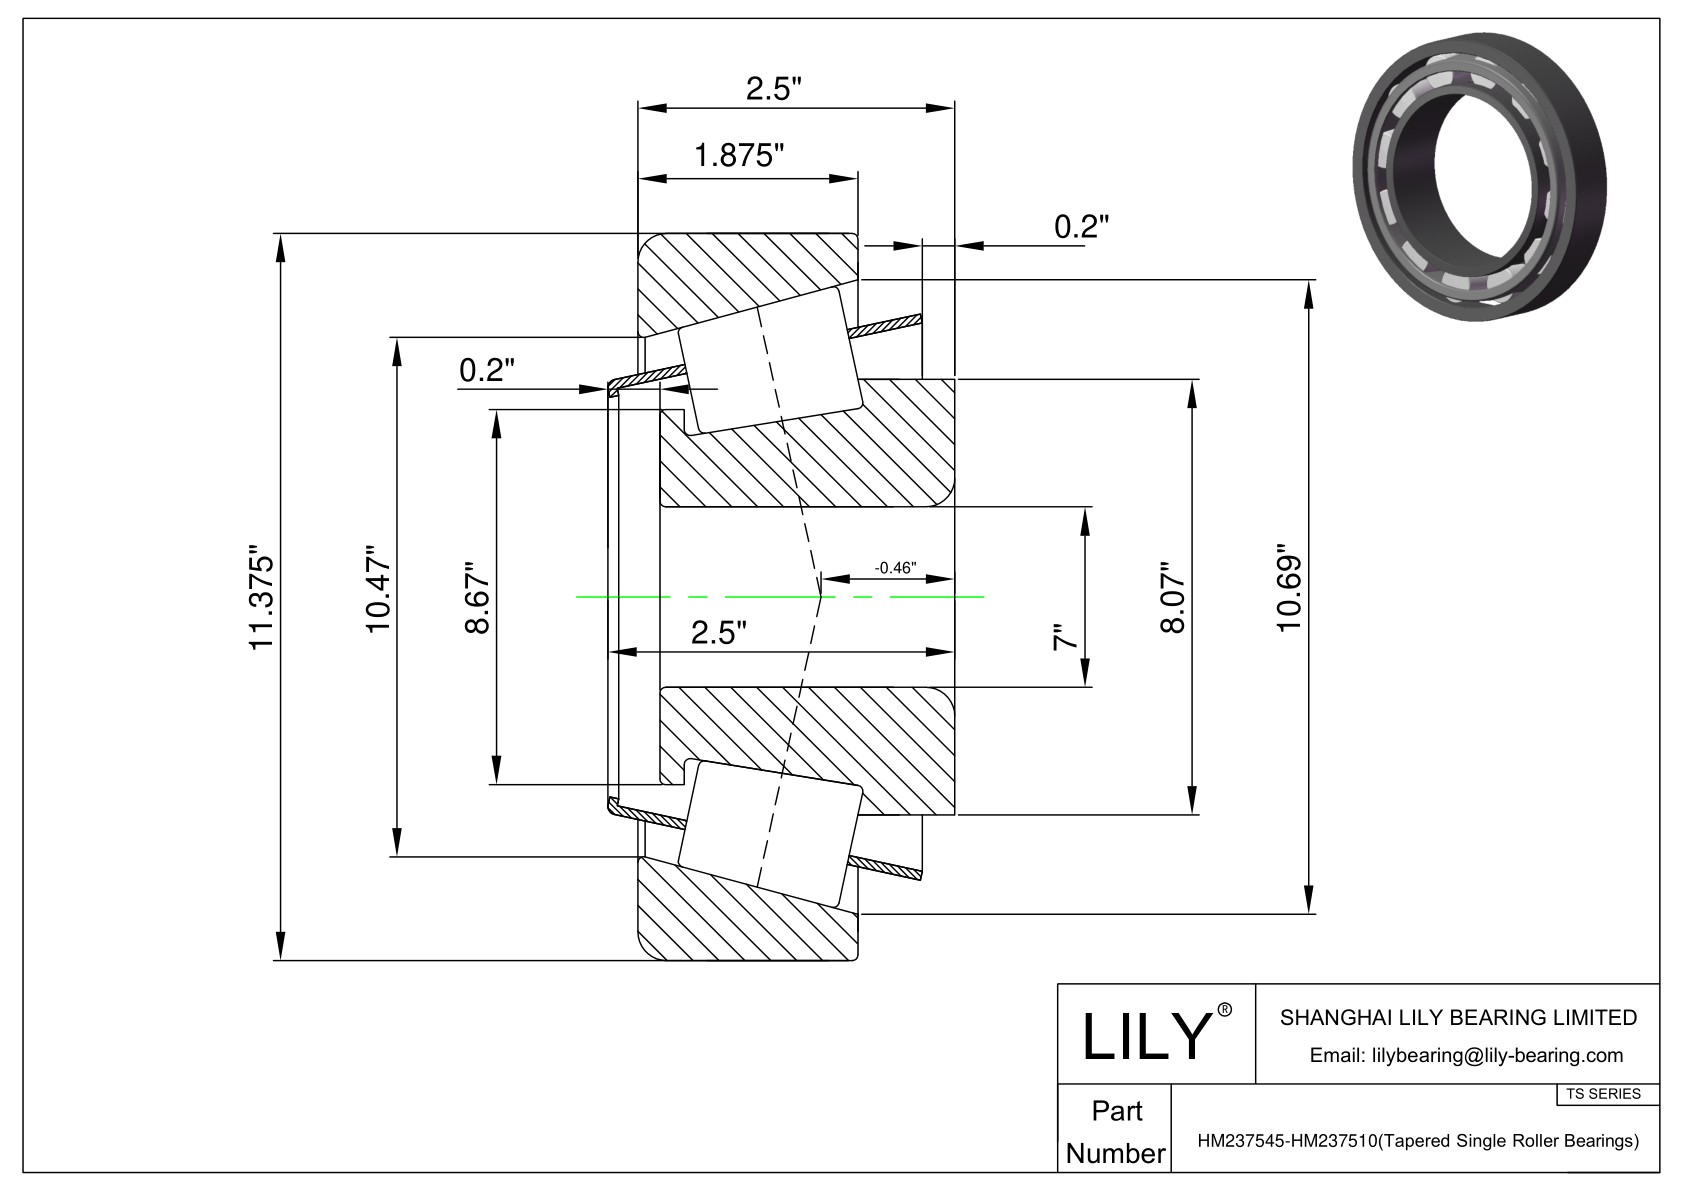 HM237545-HM237510 TS (Tapered Single Roller Bearings) (Imperial) cad drawing